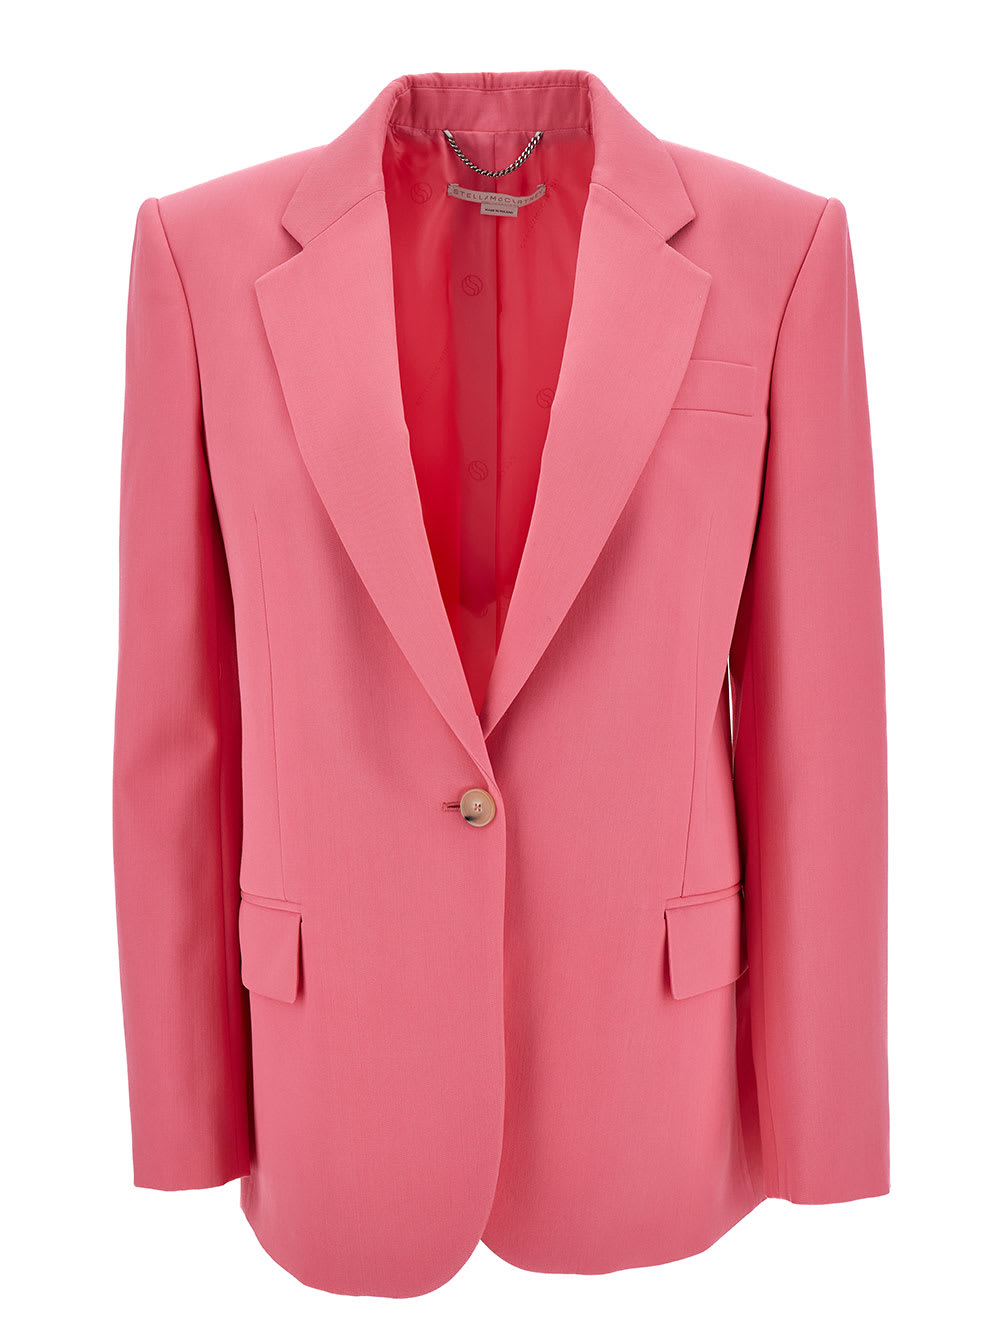 STELLA MCCARTNEY ICONIC SALMON PINK SING-BREASTED JACKET WITH SINGLE BUTTON IN WOOL WOMAN